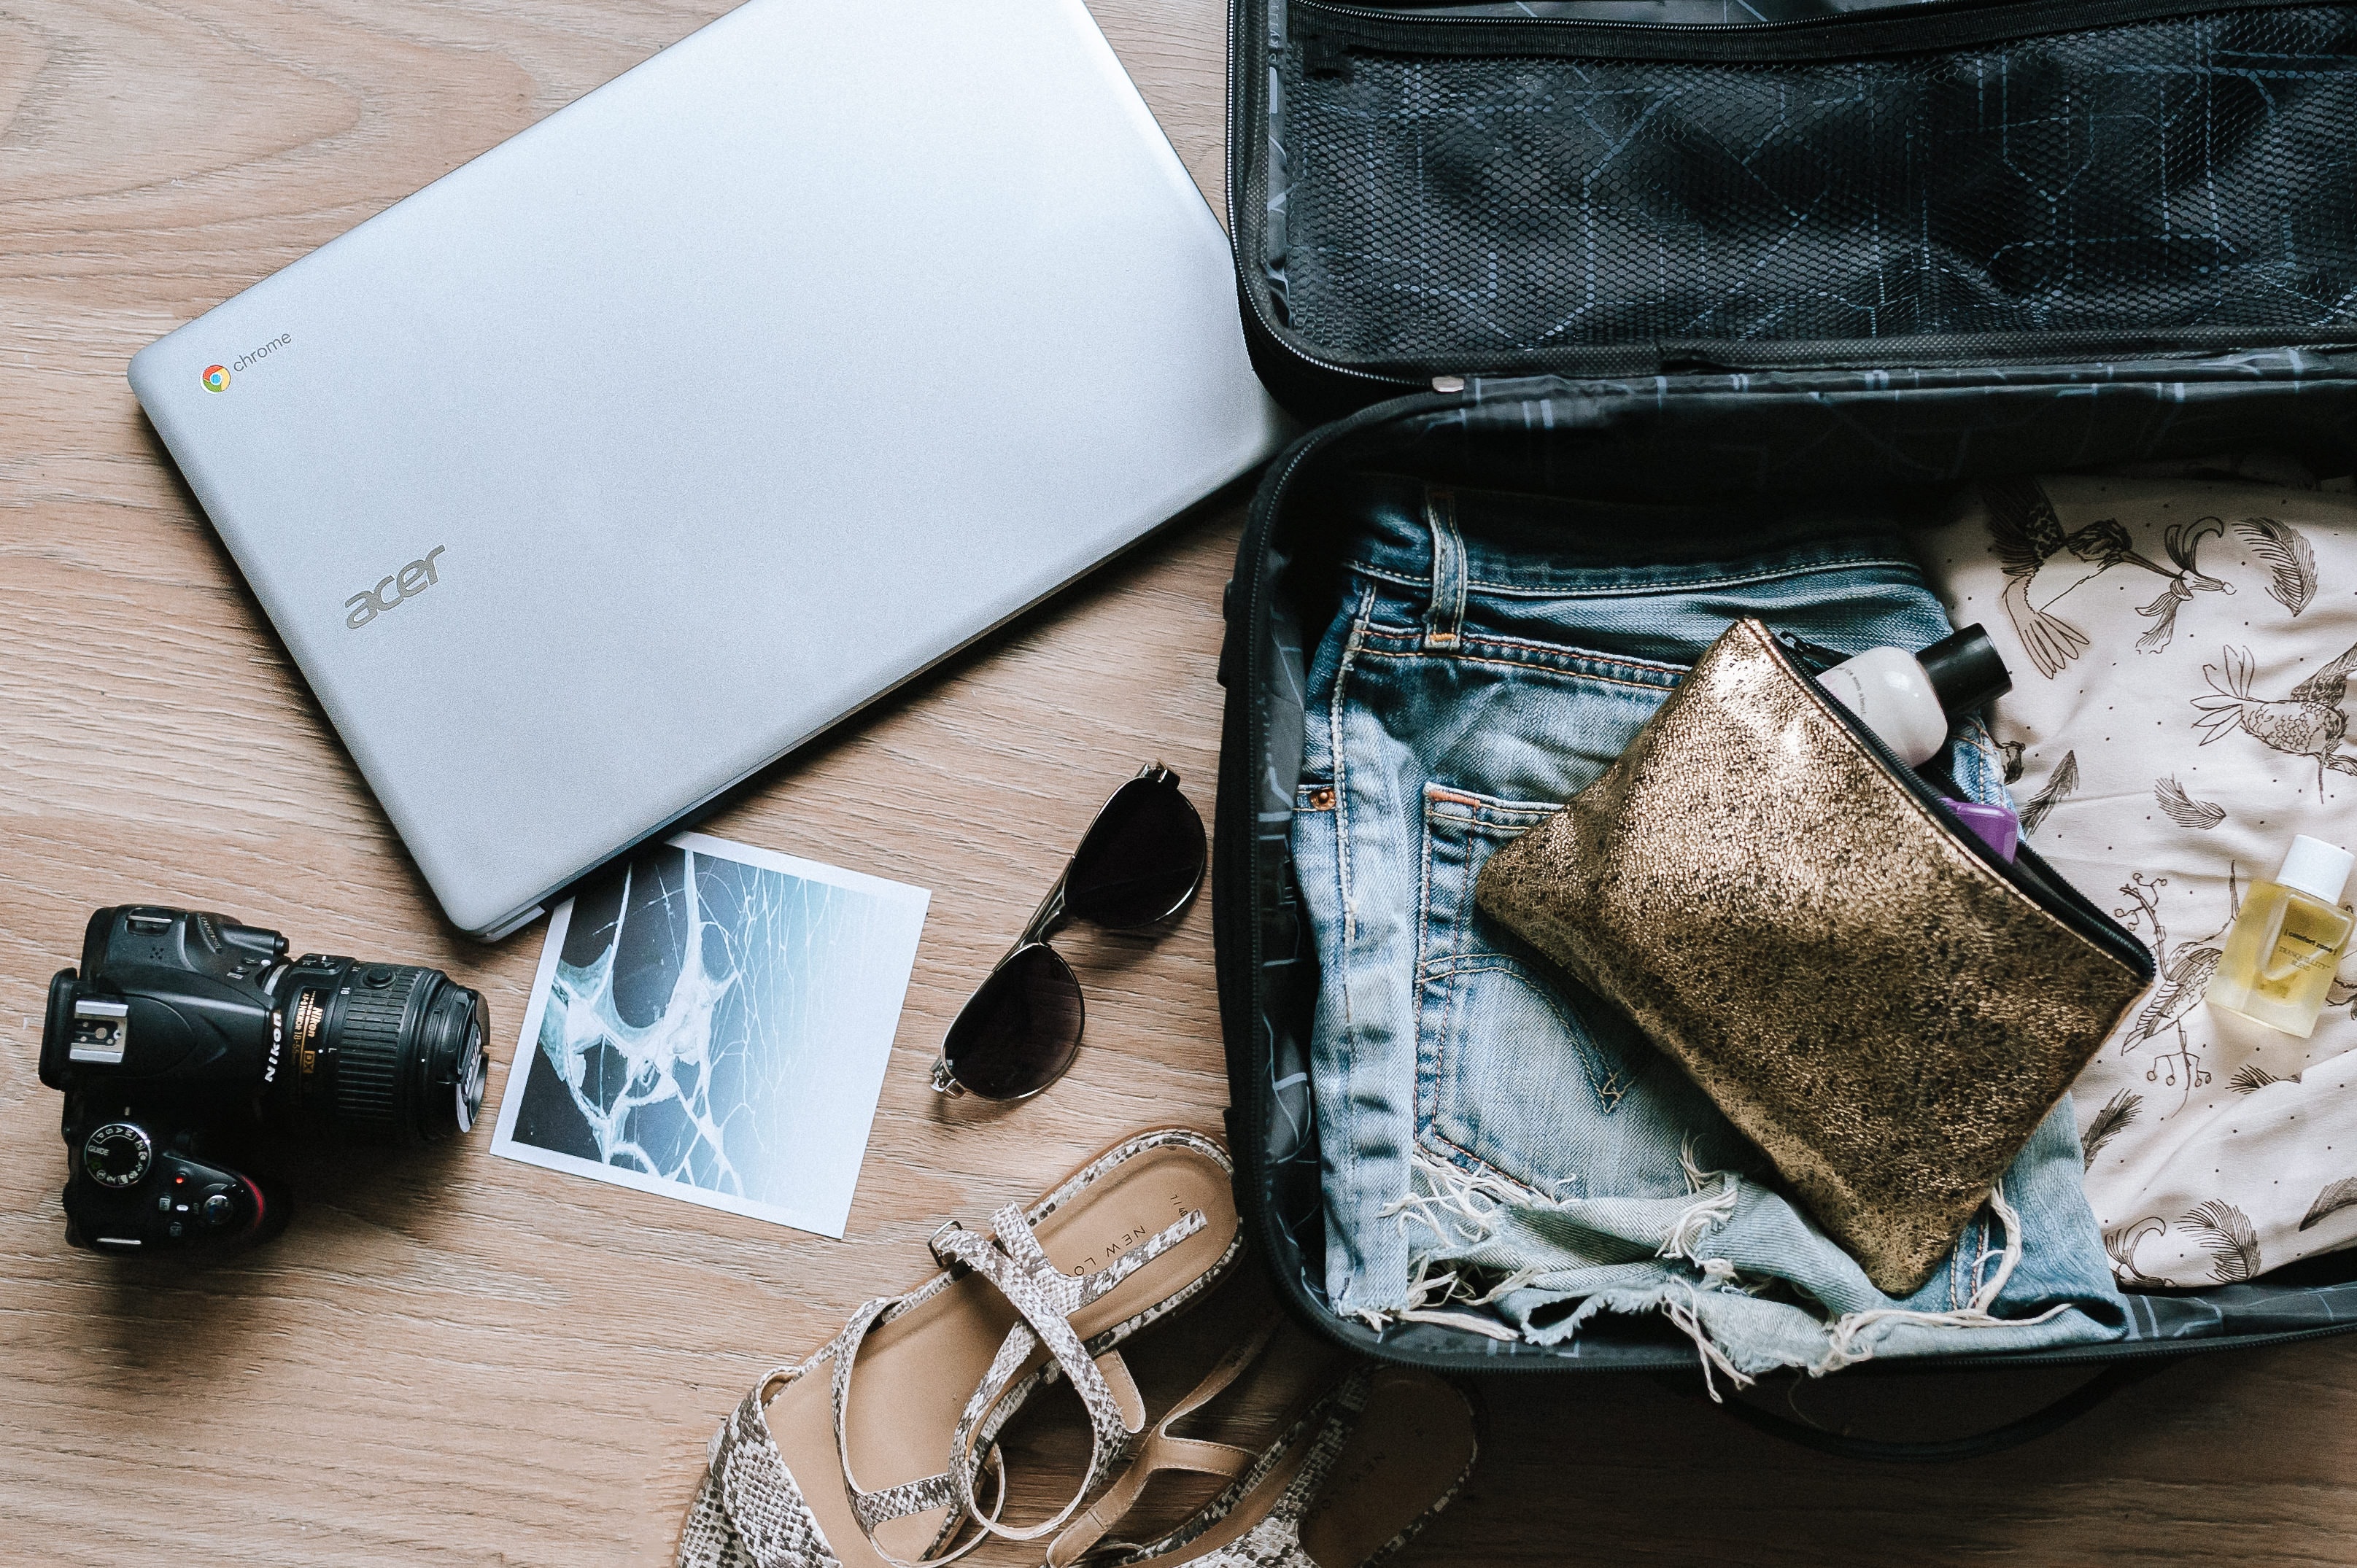 Space-Saving Hacks for Packing a Suitcase's featured image